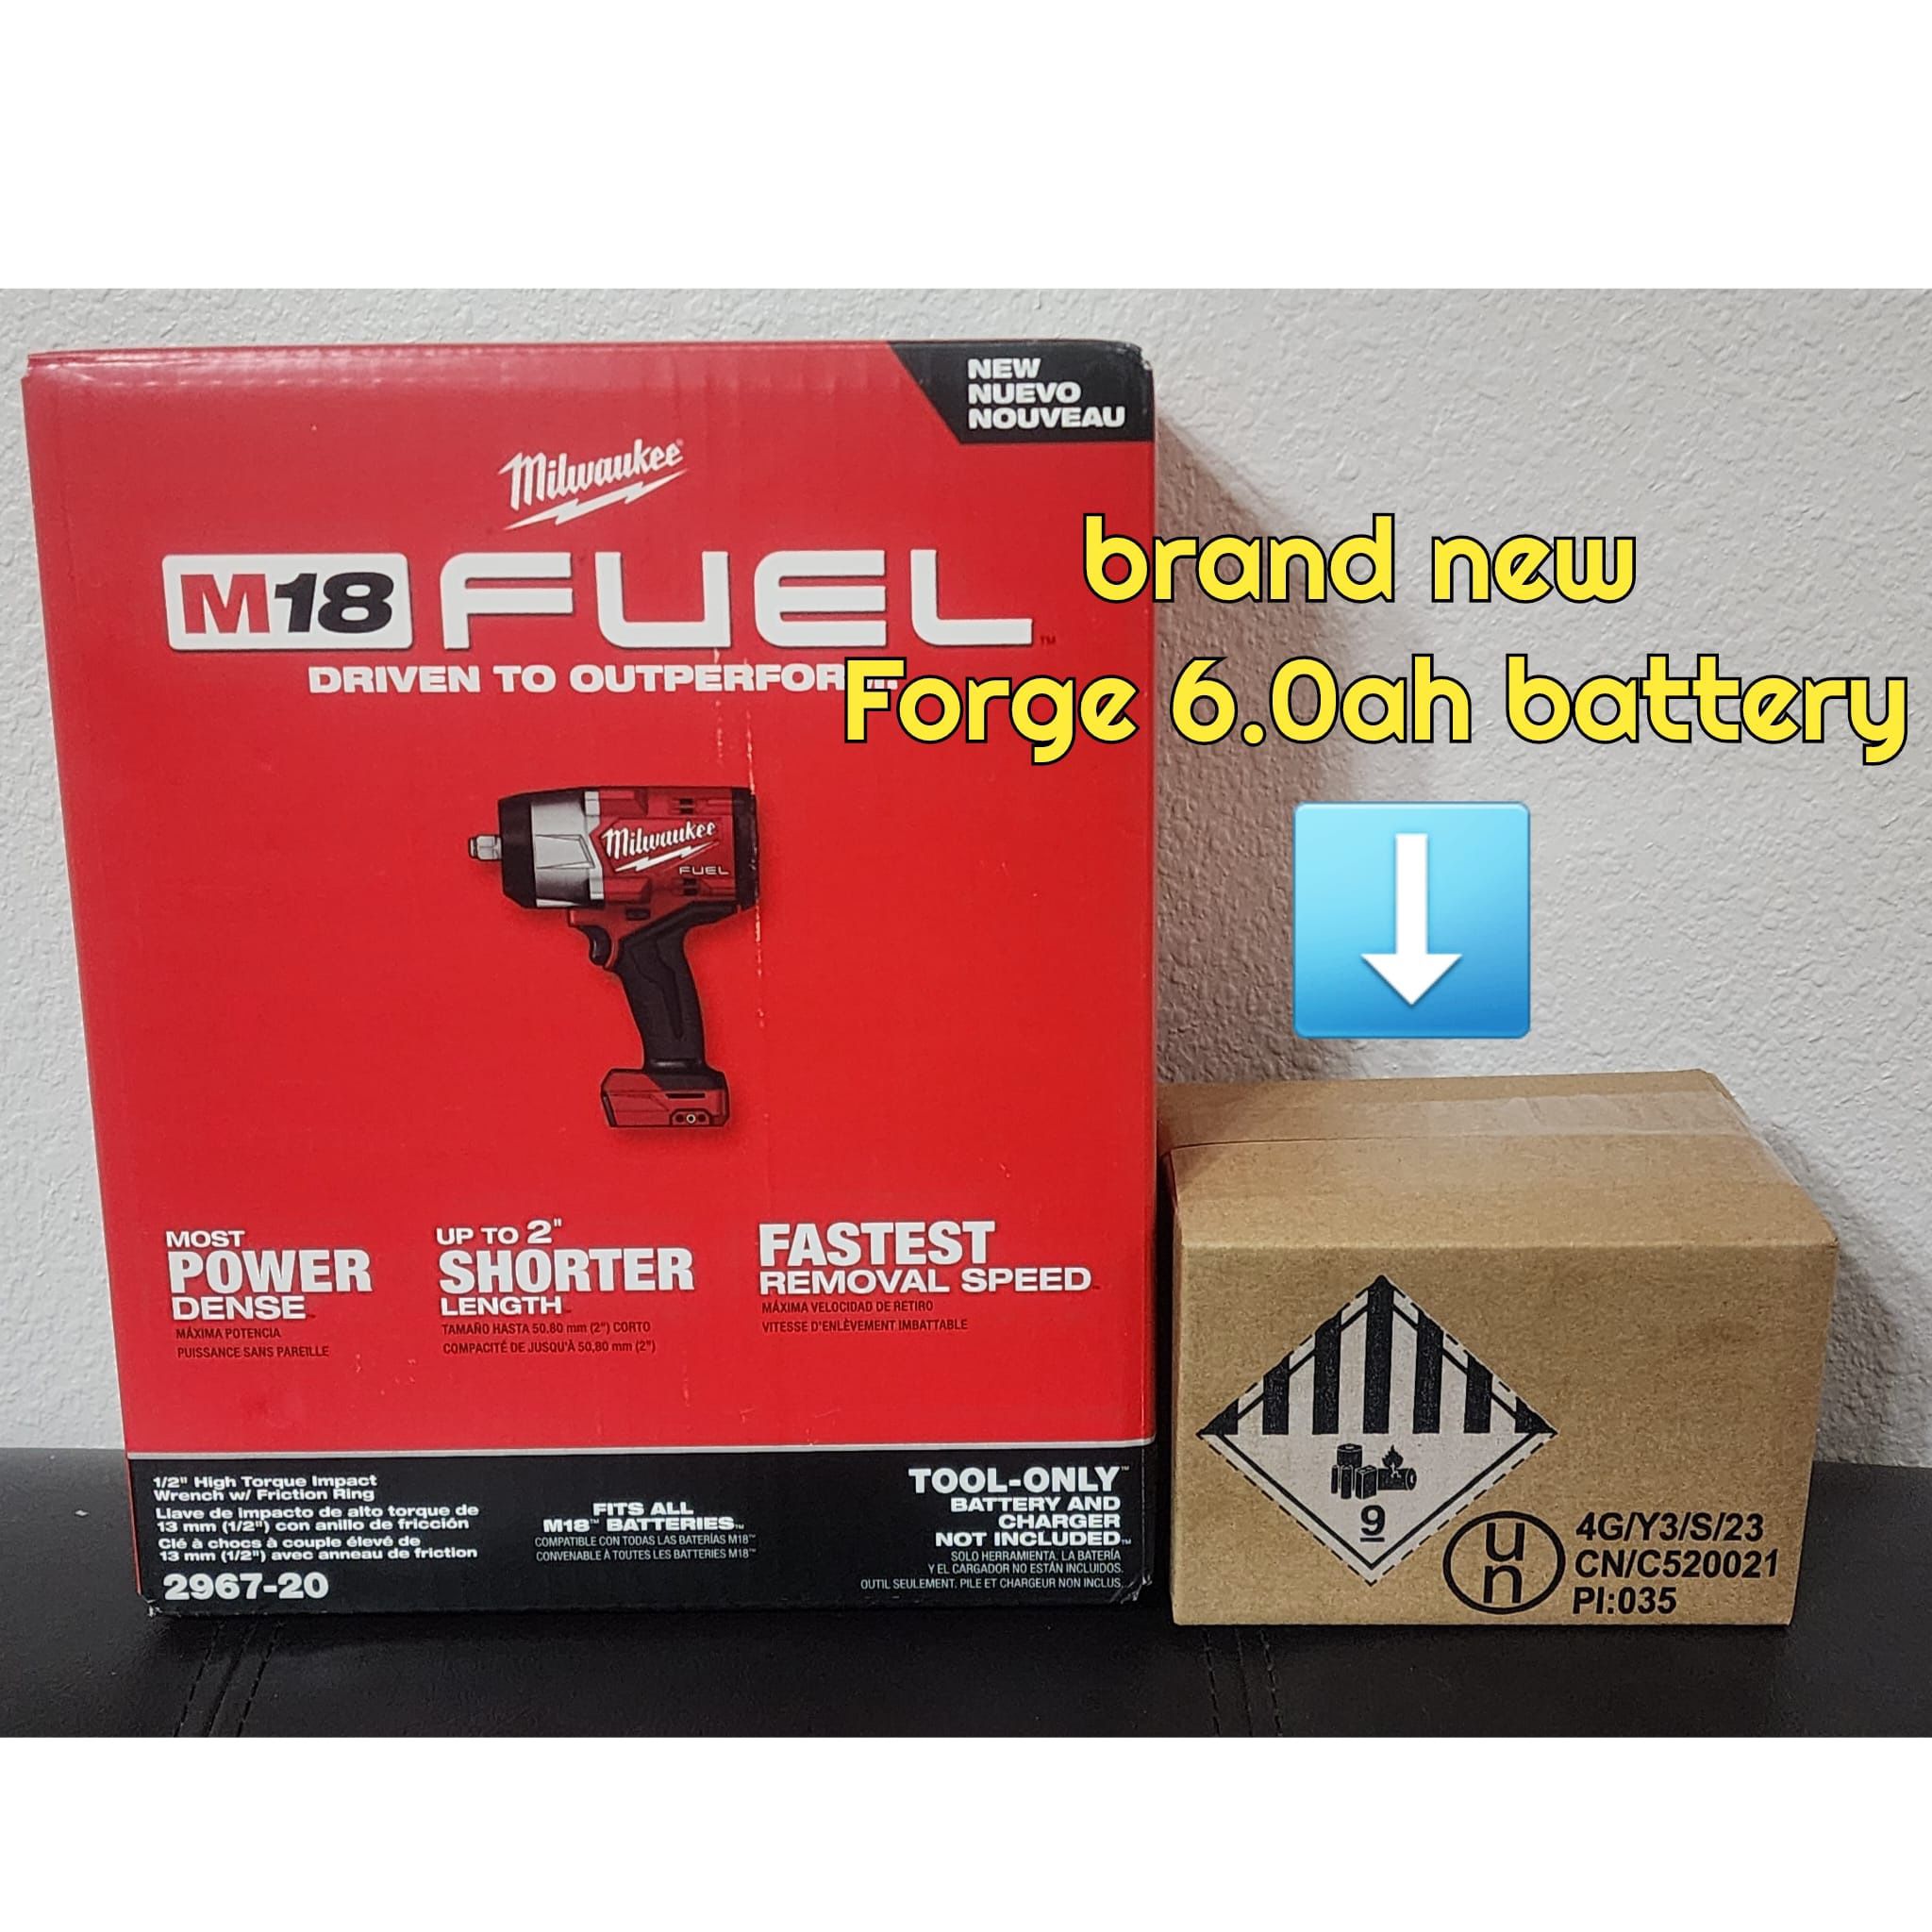 All New Milwaukee M18 (2967-20) FUEL 1/2" High Torque Impact Wrench w/ New FORGE 6.0 Battery